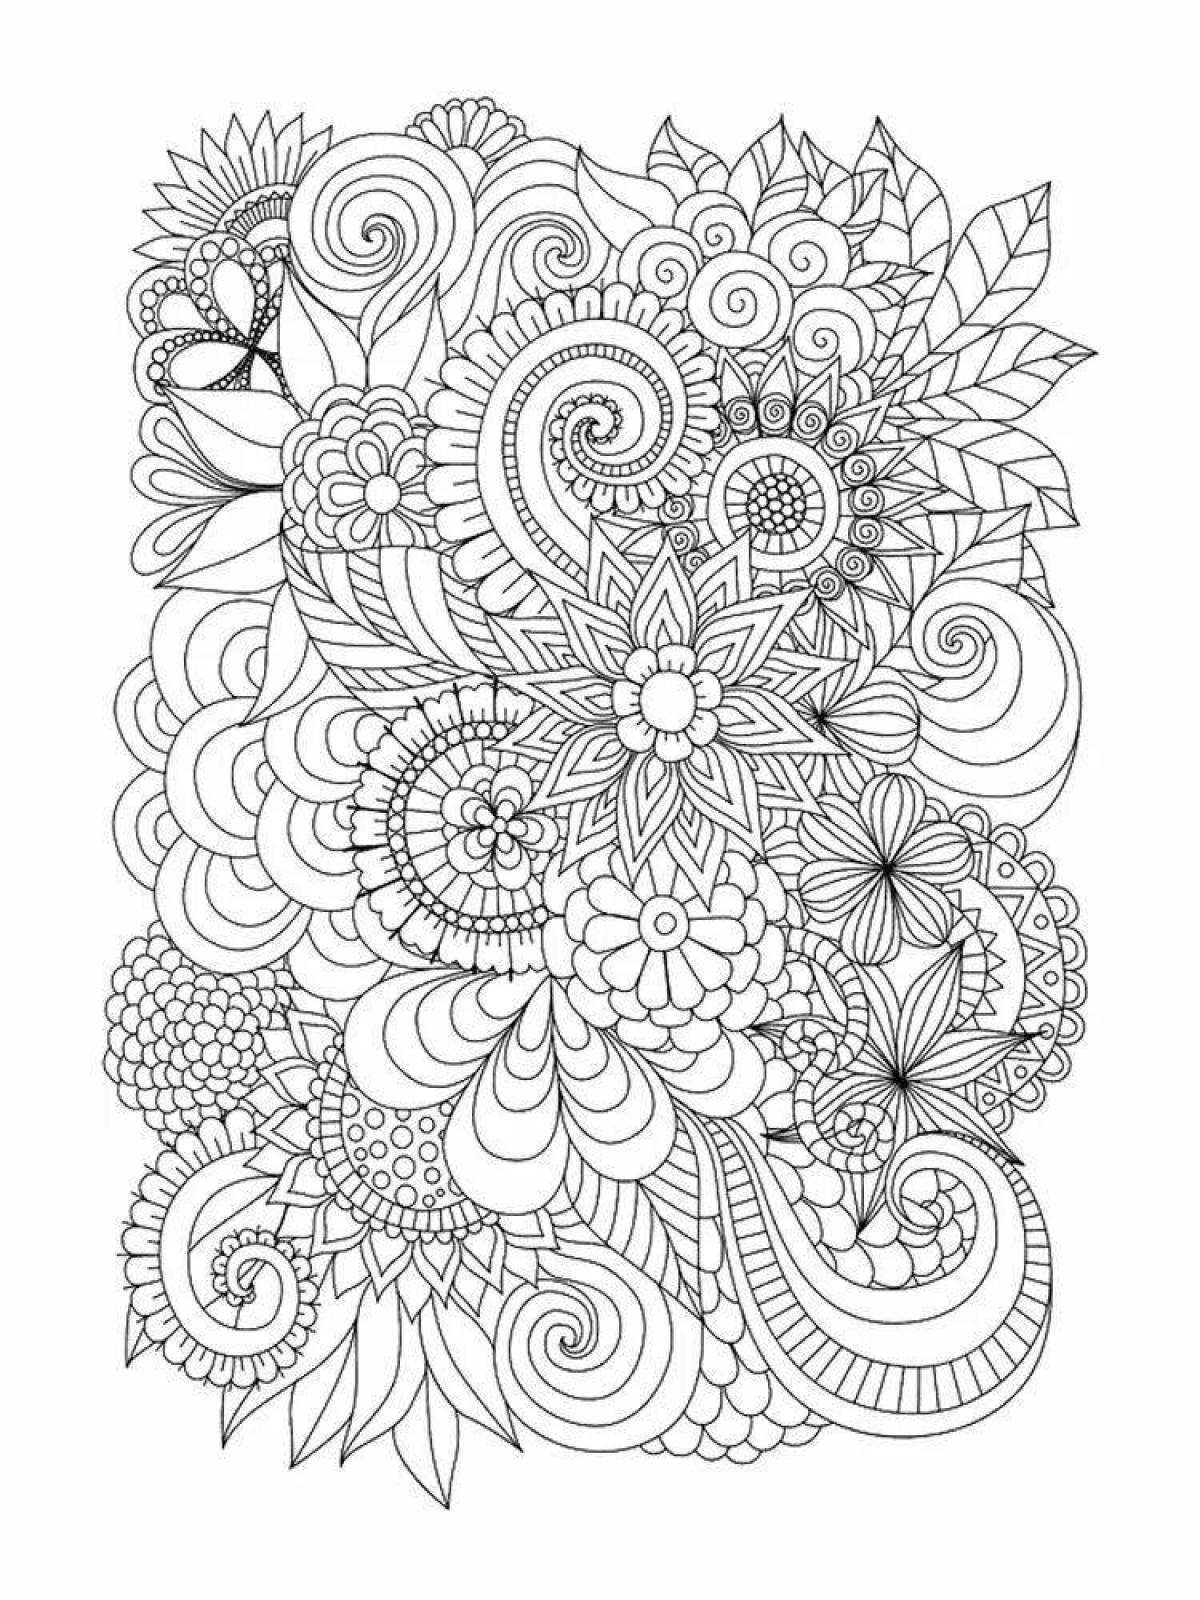 Exciting seal anti-stress coloring book